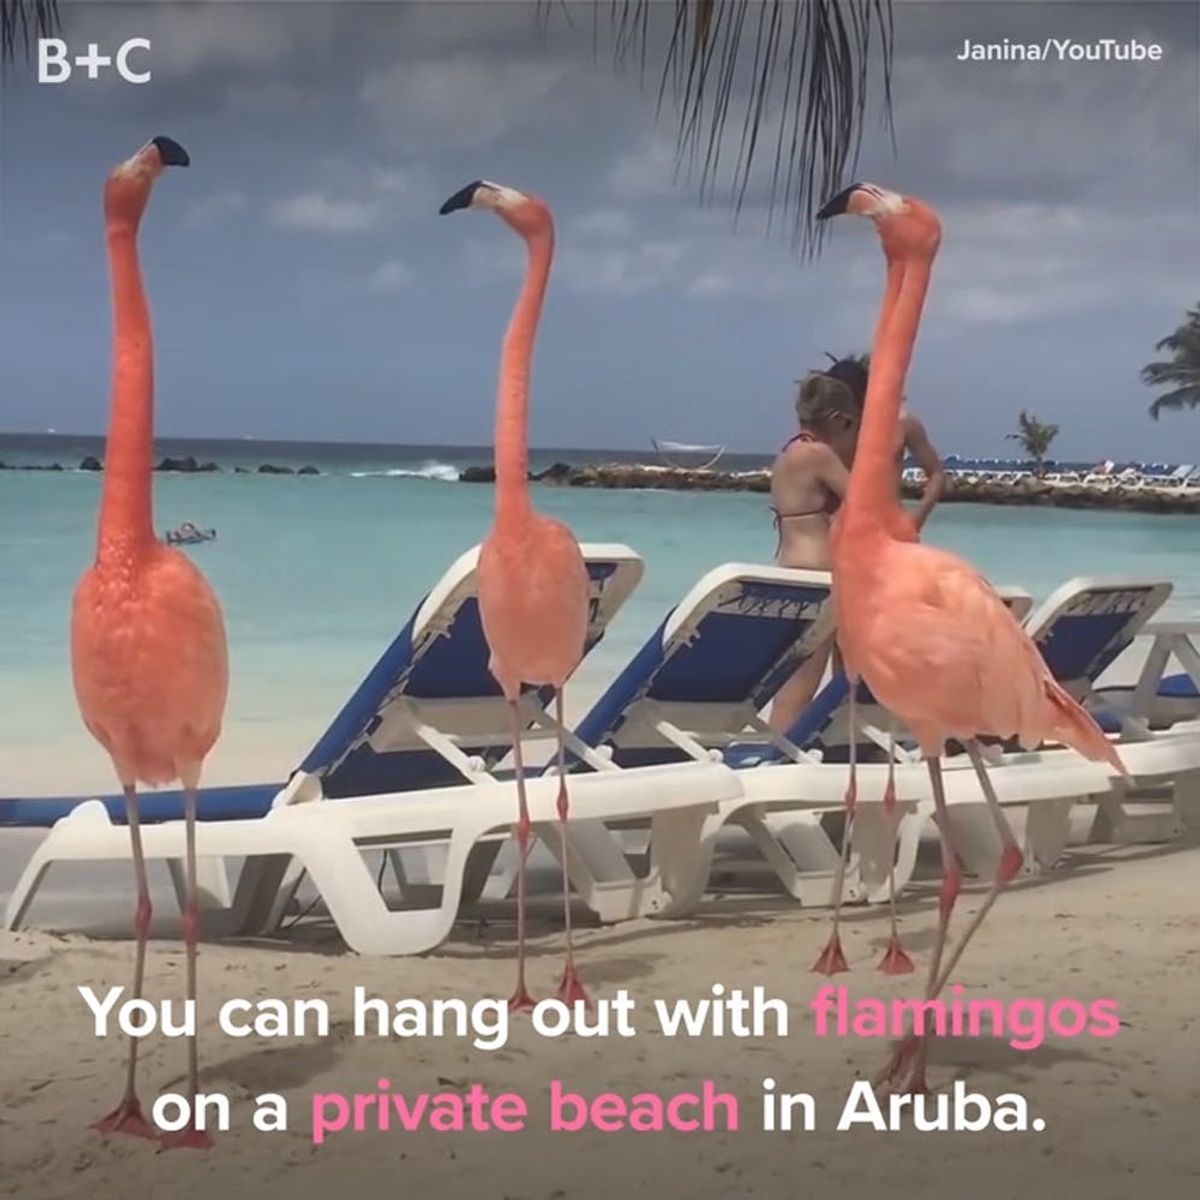 Arubaâ€™s Flamingo Beach Is *Officially* At the Top of Our Travel List